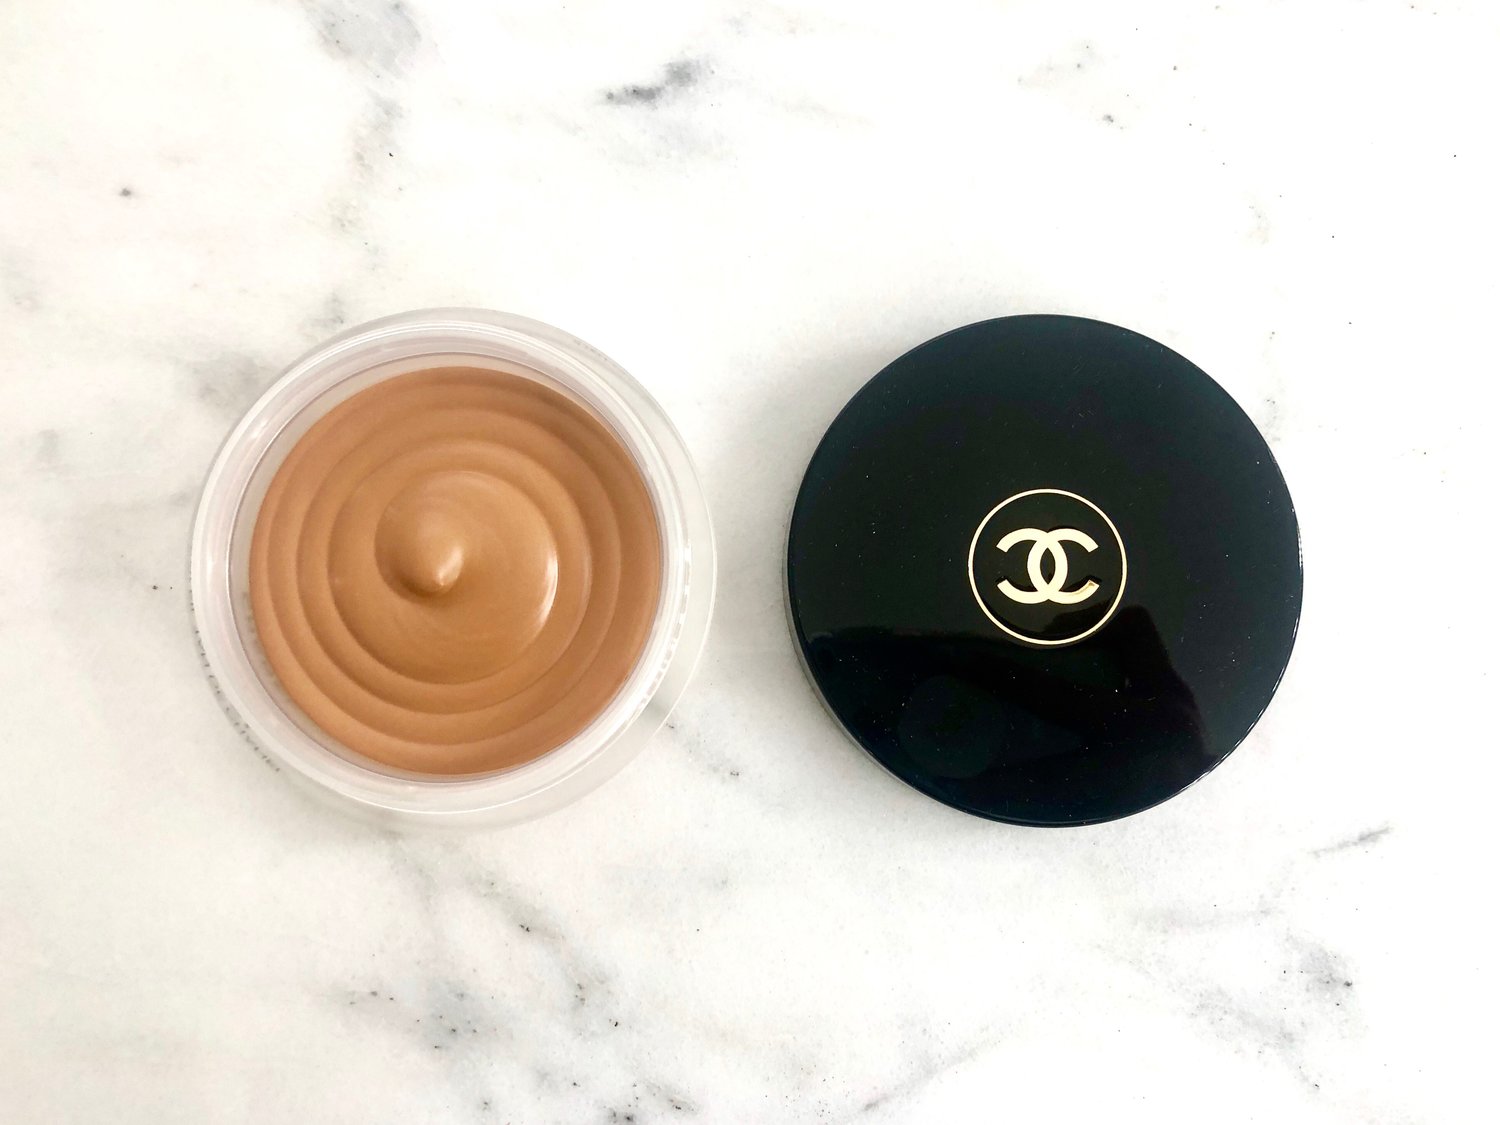 Better late than never - Chanel's Soleil Tan de Chanel Bronzer in Sable  Beige — Bagful of Notions